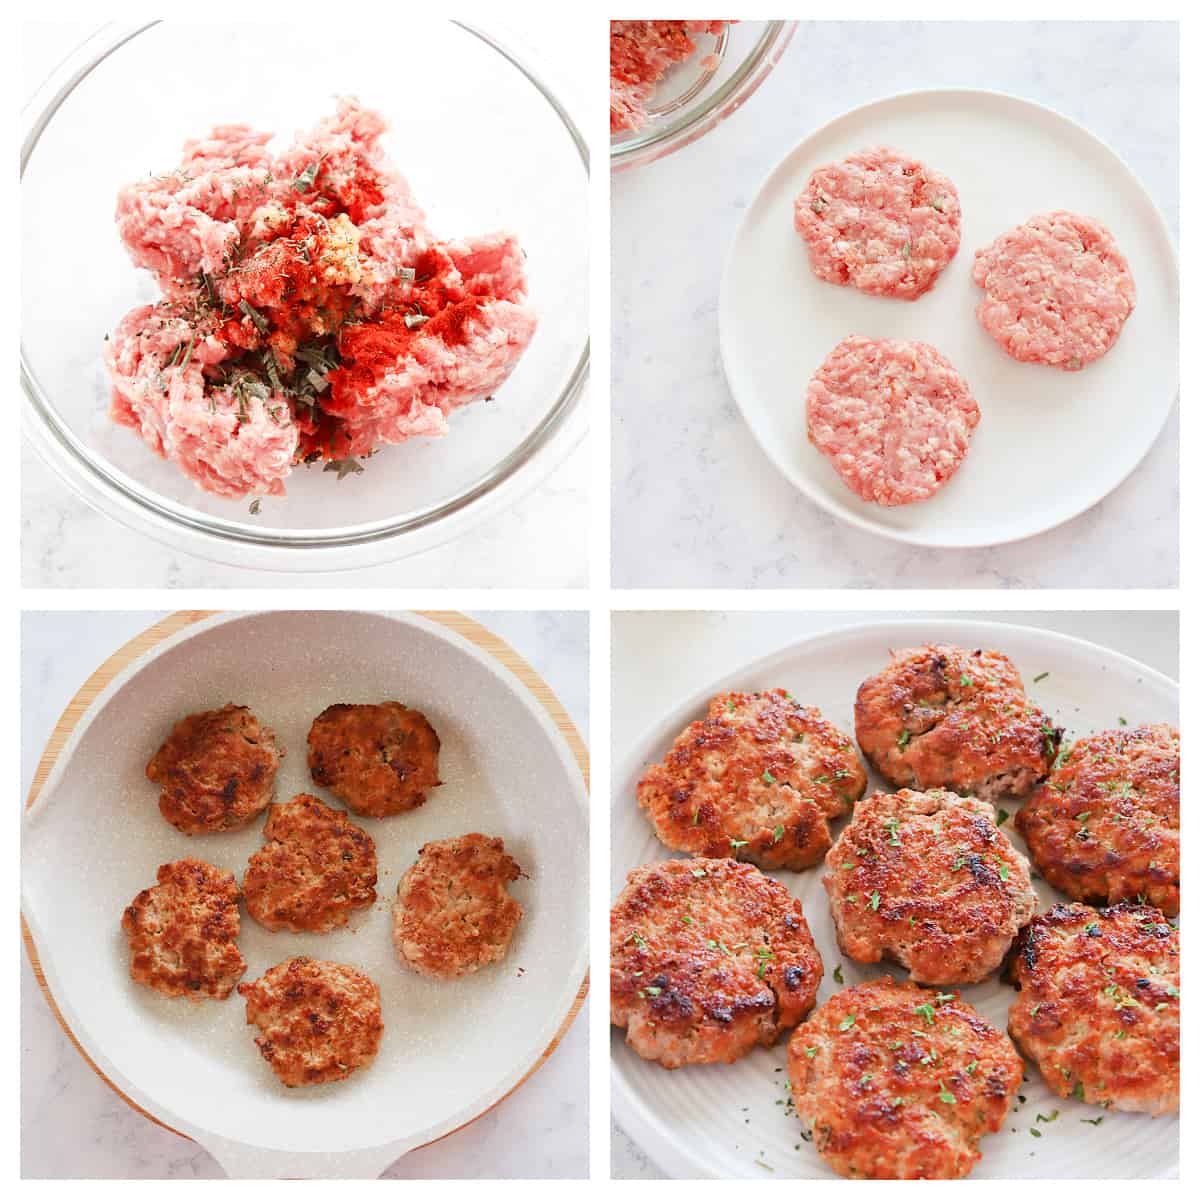 Steps of making breakfast sausage collage